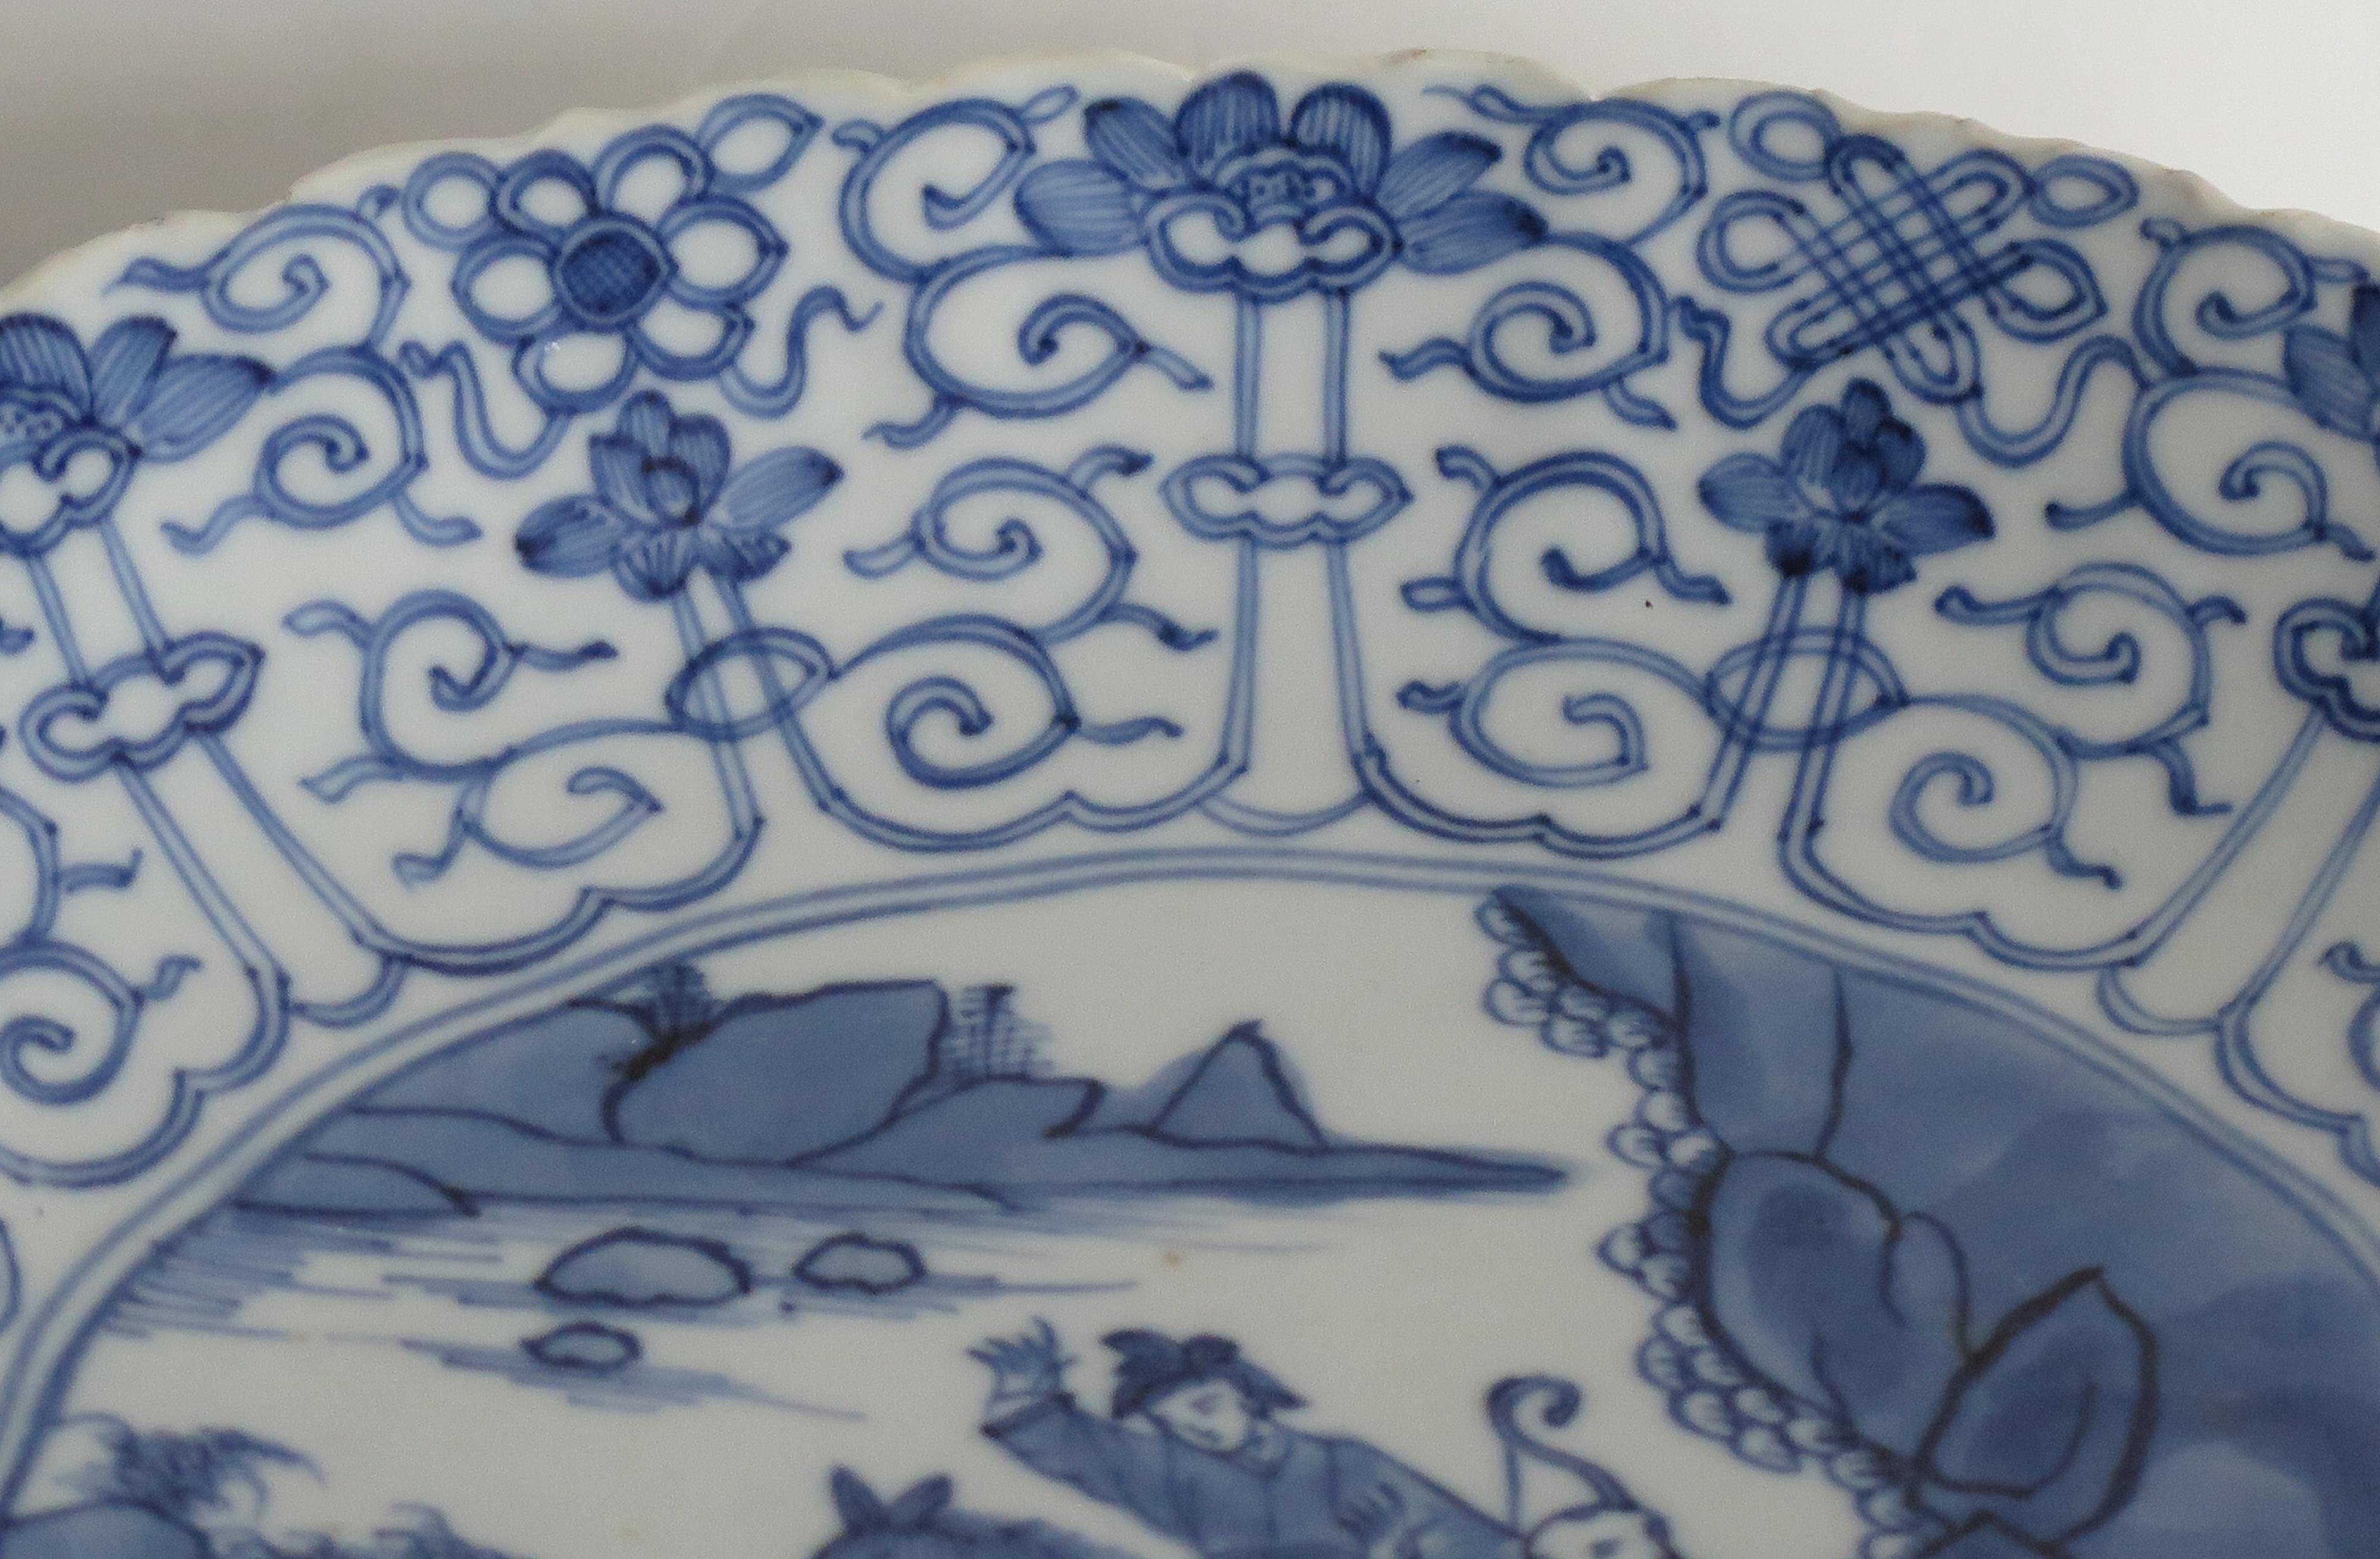 17th Century Kangxi Period Chinese Dish or Plate Porcelain Blue & White Chenghua Mark Ca 1680 For Sale